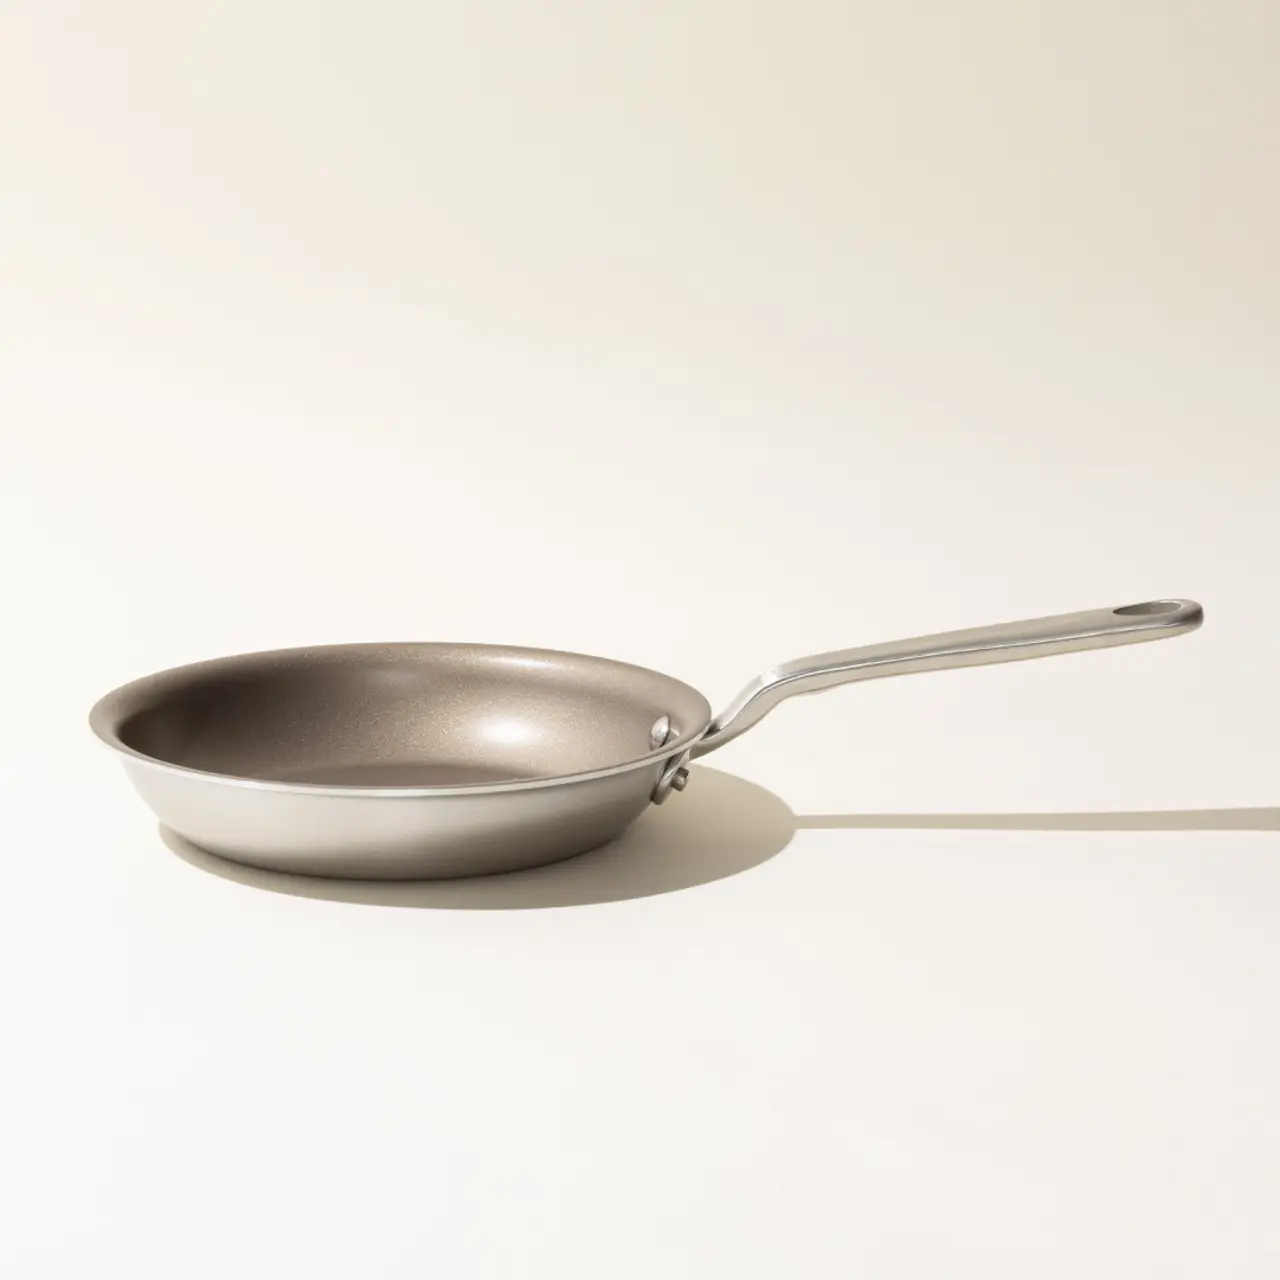 A stainless steel frying pan with a long handle is positioned to the left on a light background with a noticeable shadow to its right.